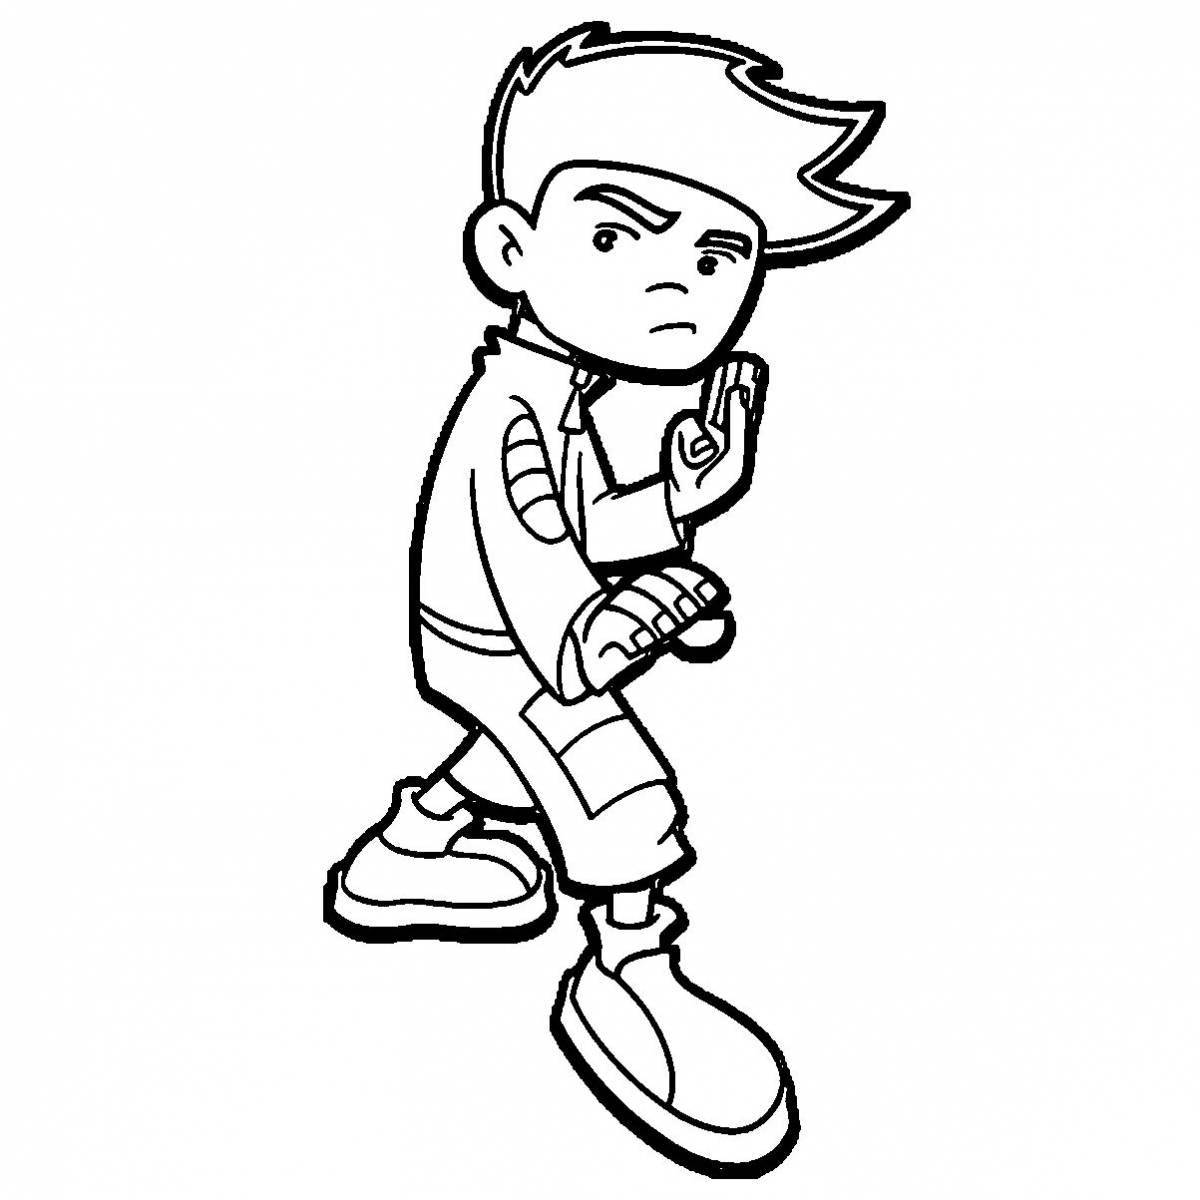 Subway surfers funny coloring book